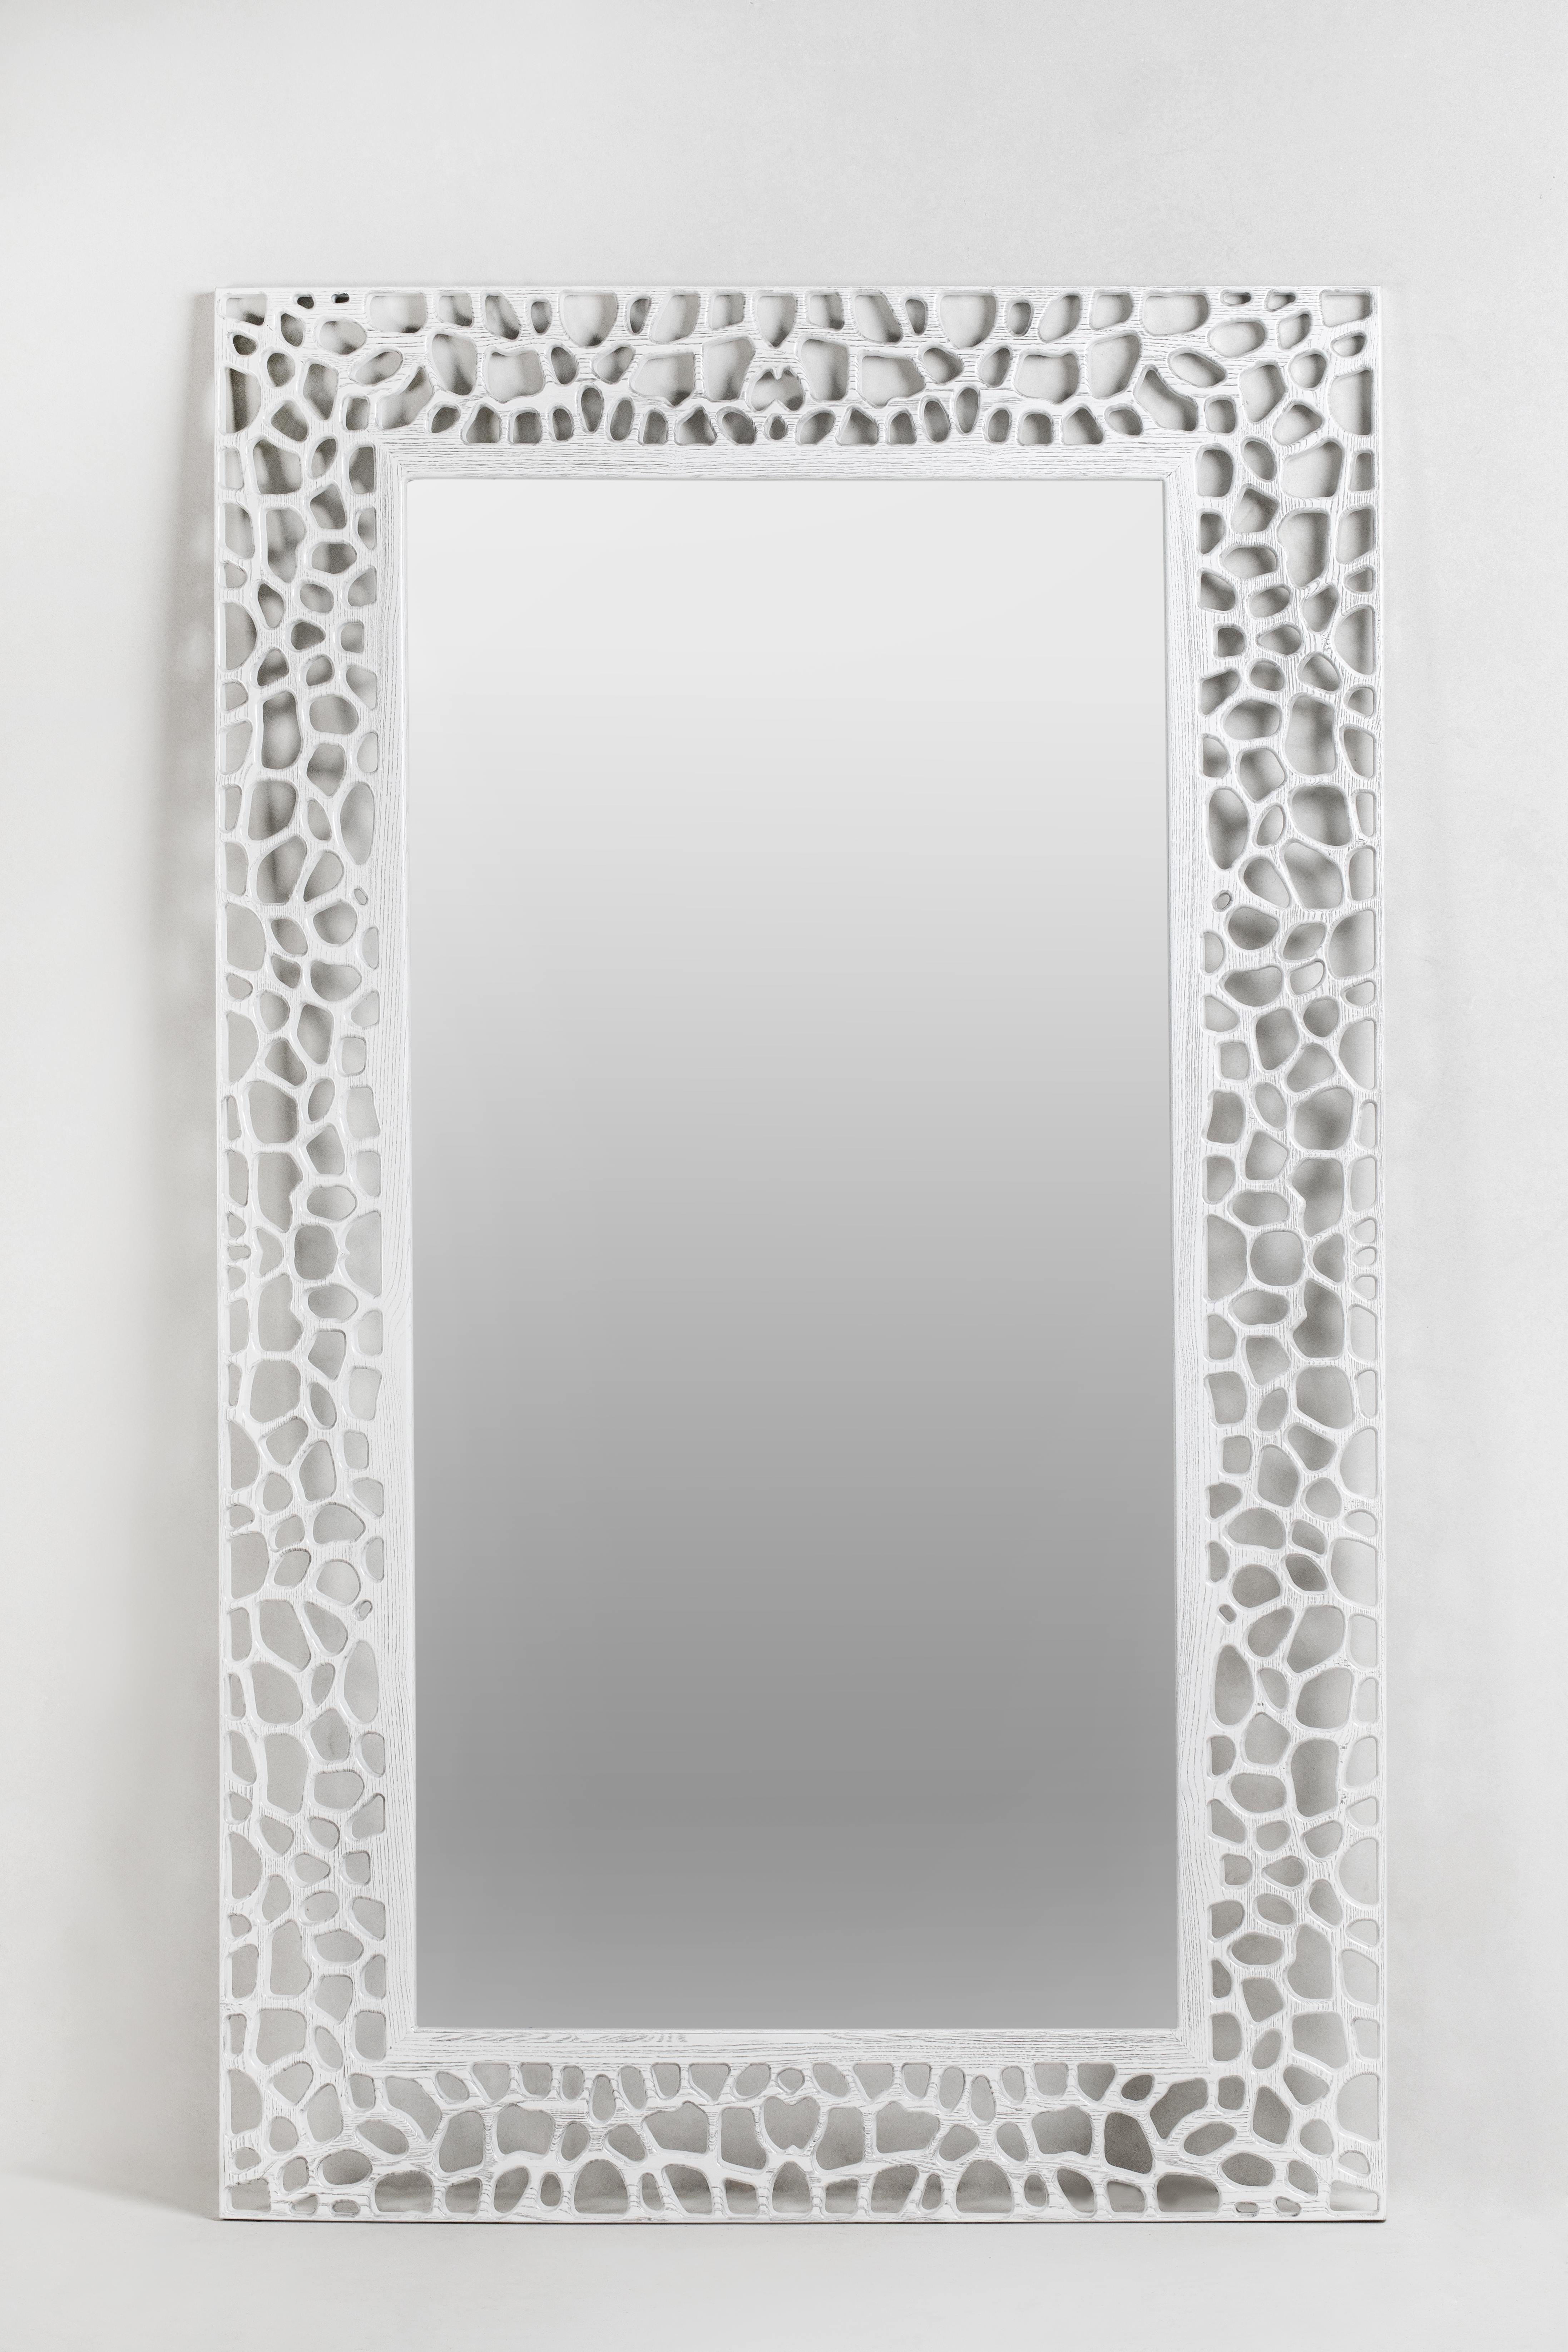 (Final Payment Listing) Angola White Ash Solid Wood Mirror 3